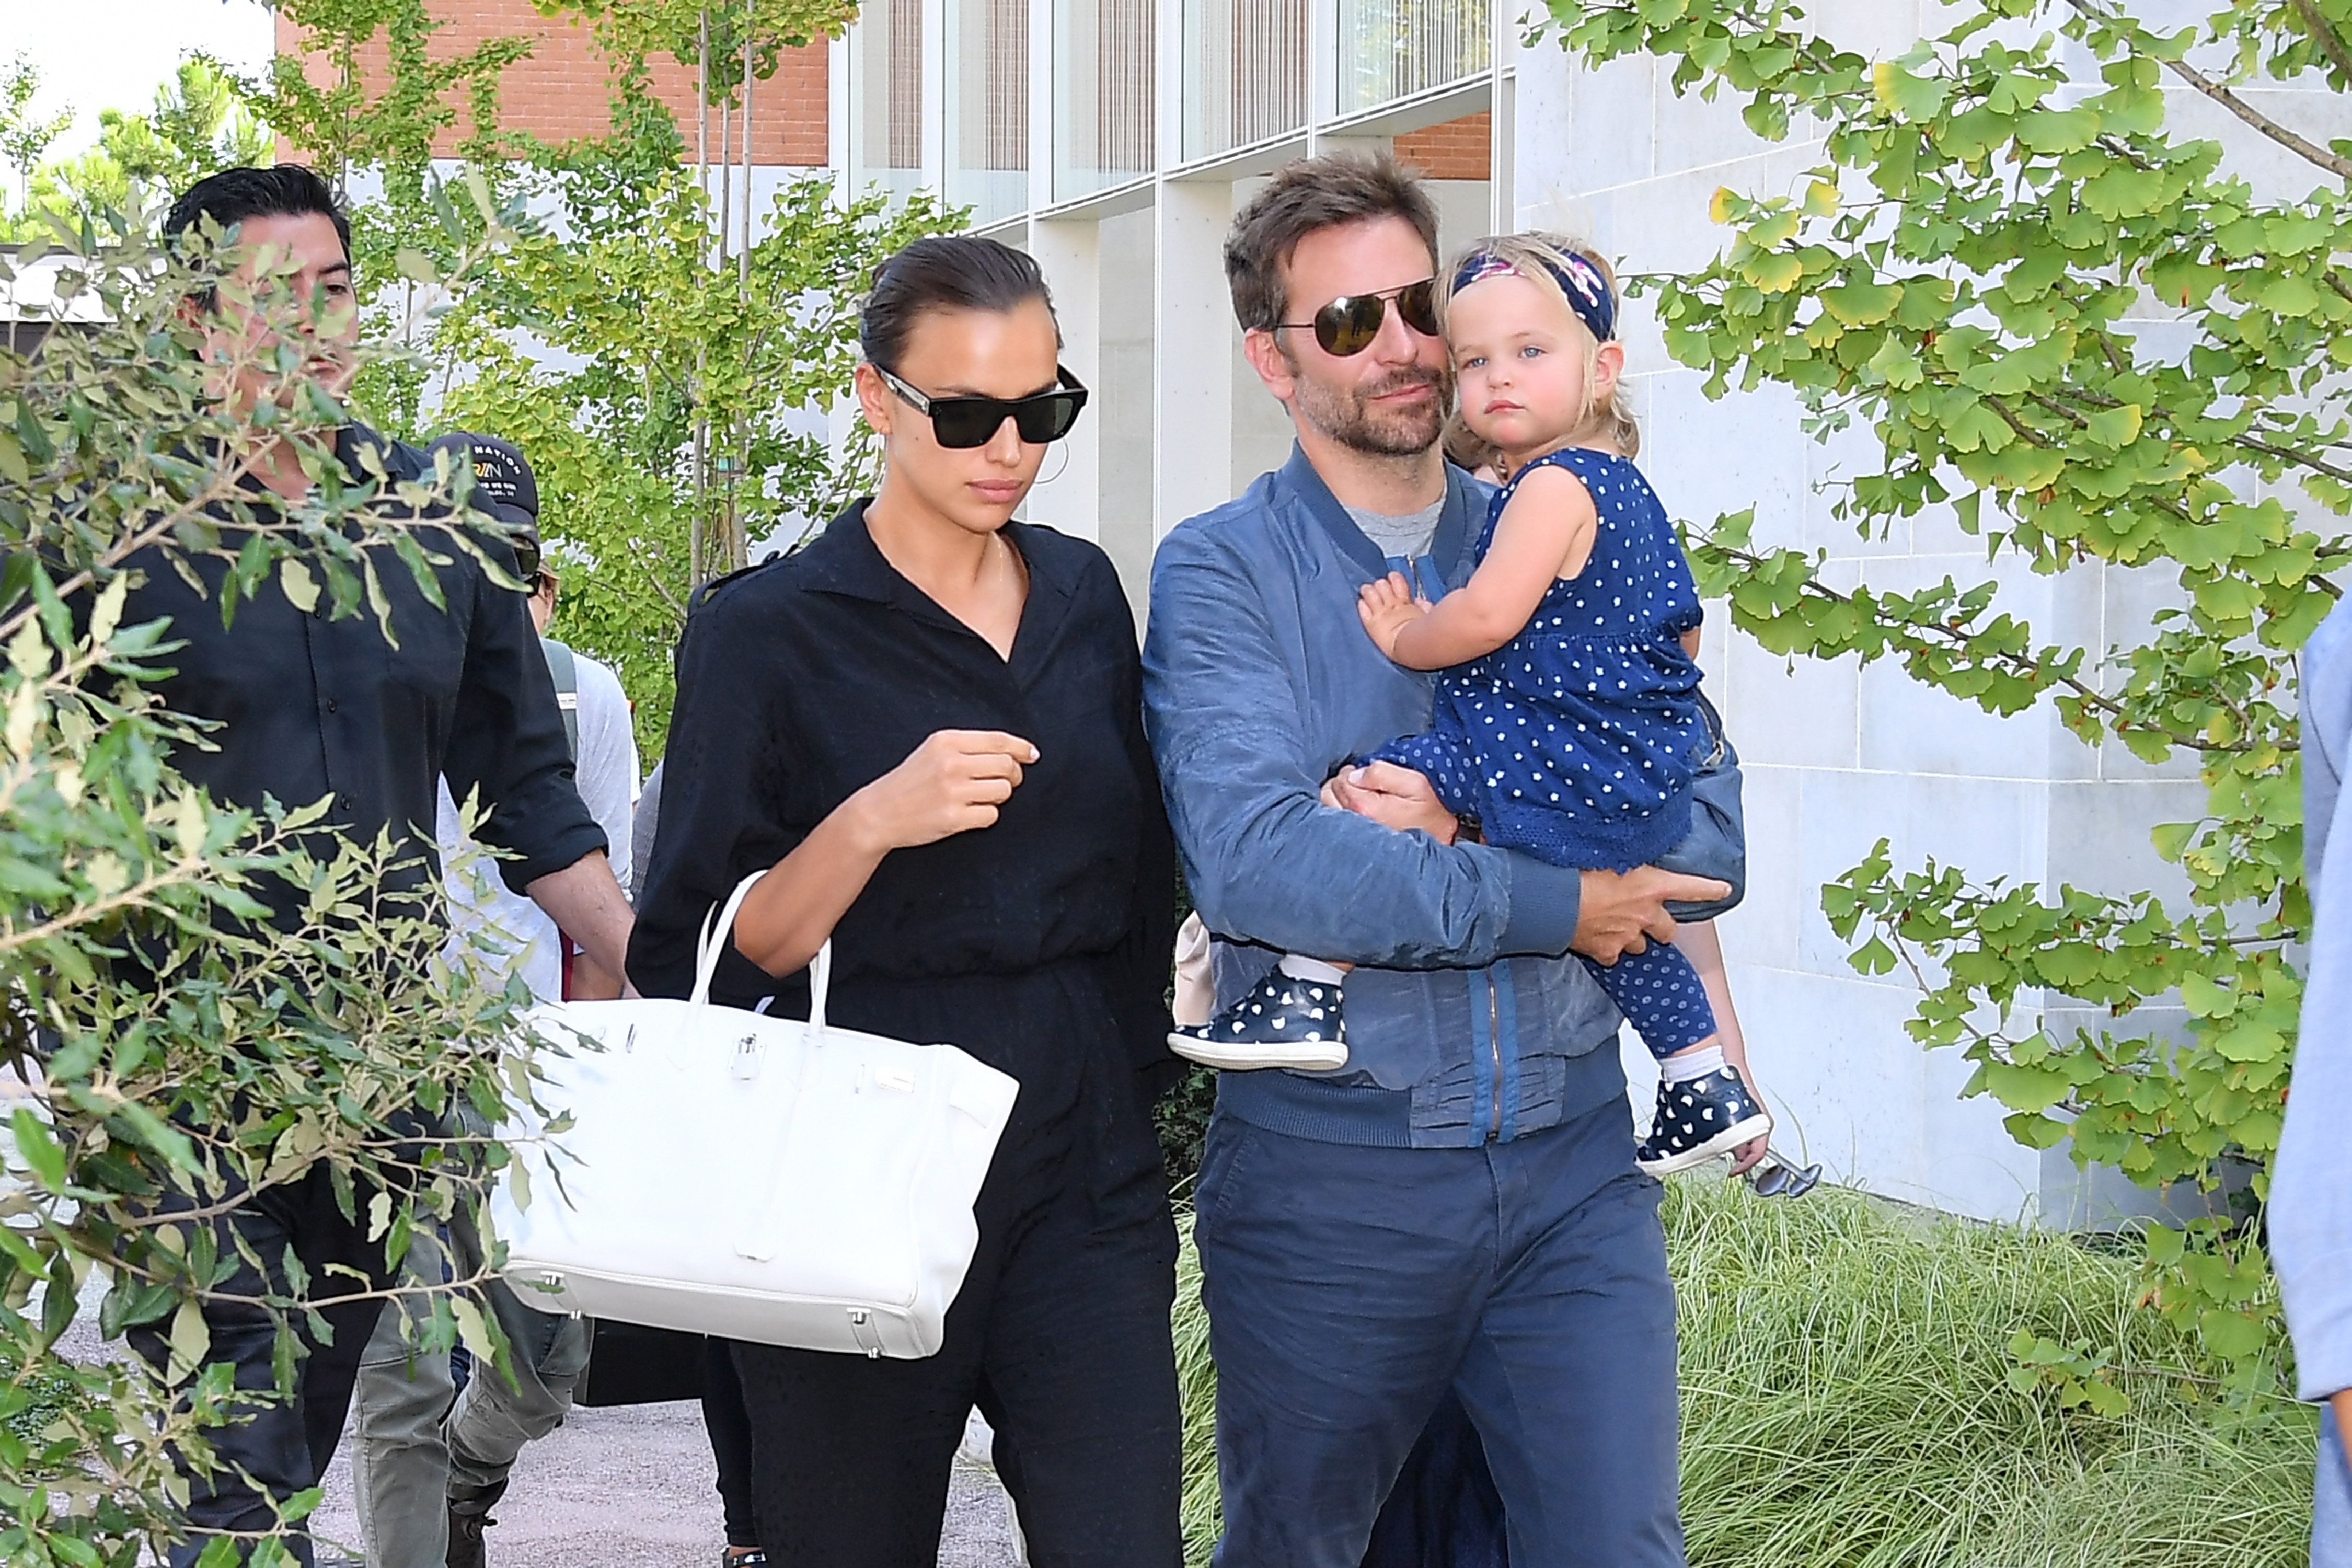 Bradley Cooper, Irina Shayk, and Lea in Venice, Italy on August 30, 2018 | Source: Getty Images